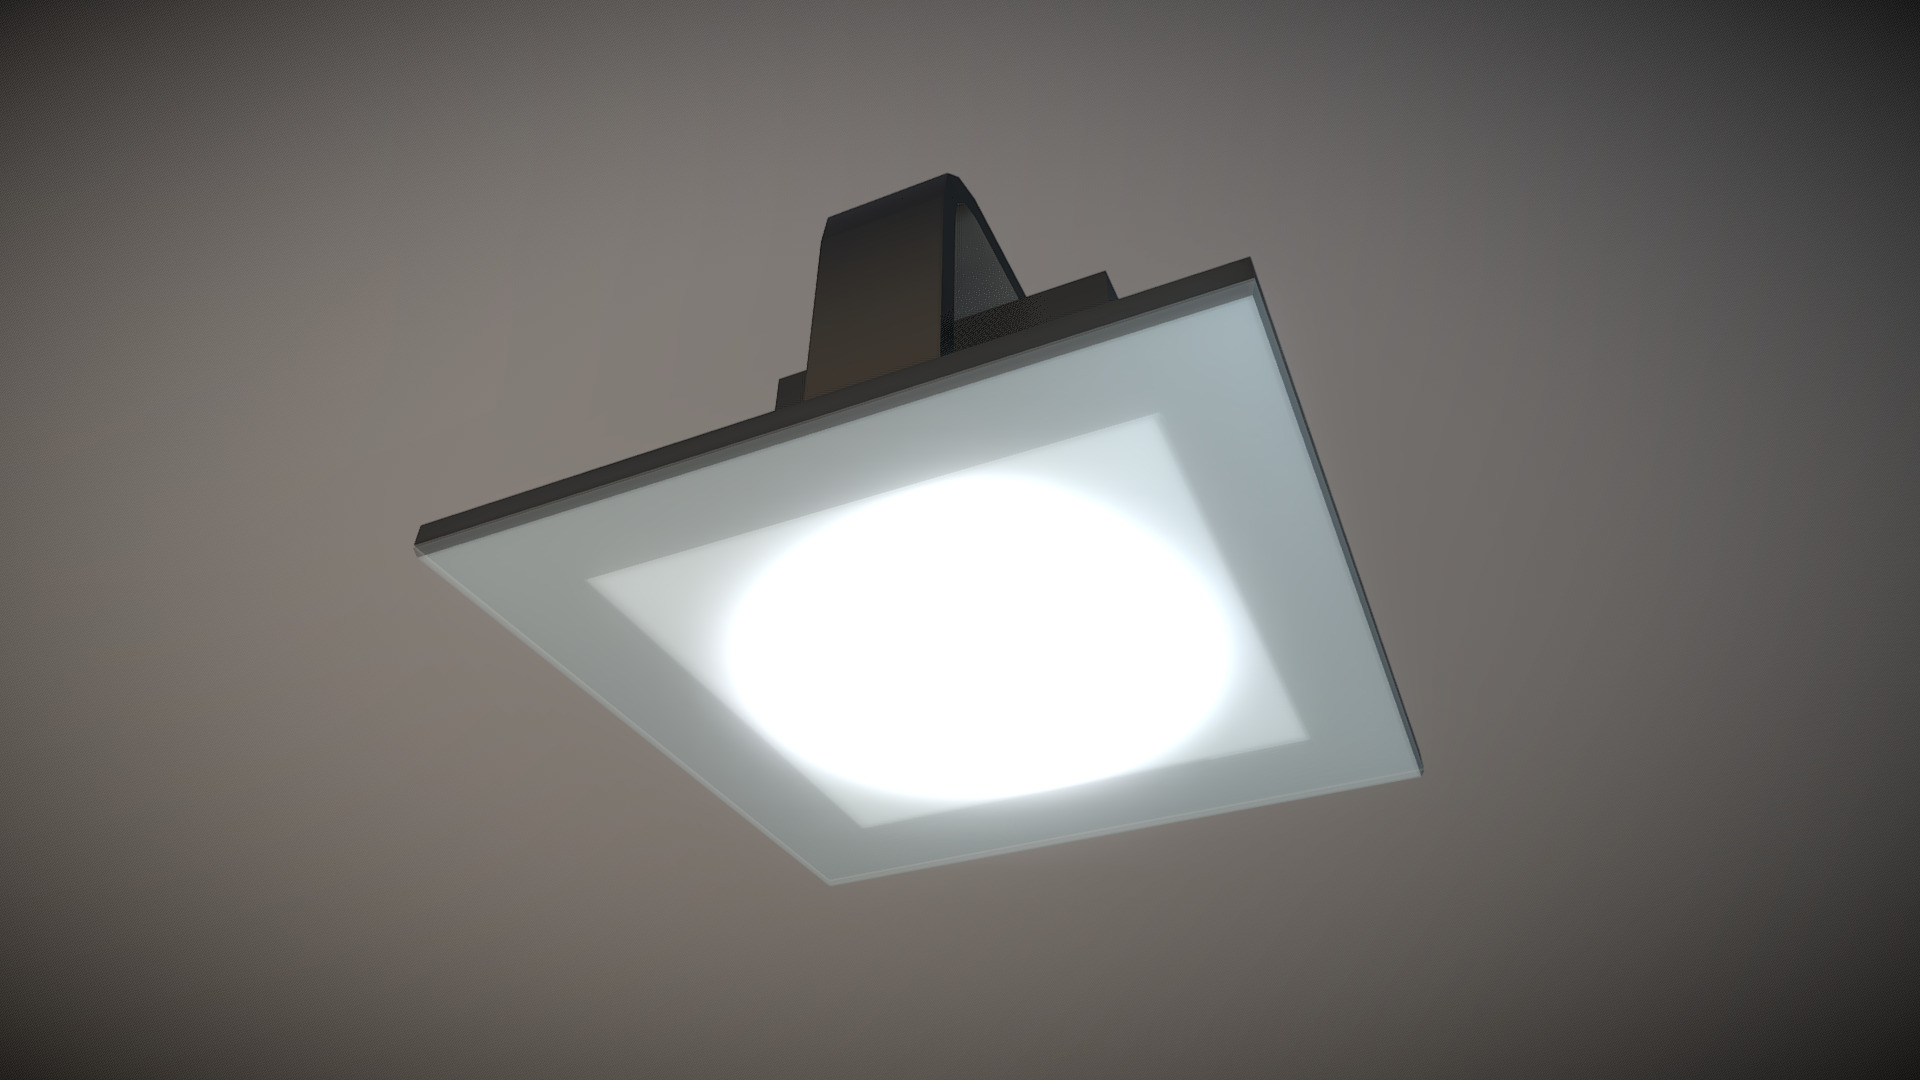 3D model Low-Poly Ceiling Lamp 3 - This is a 3D model of the Low-Poly Ceiling Lamp 3. The 3D model is about a light fixture on a ceiling.